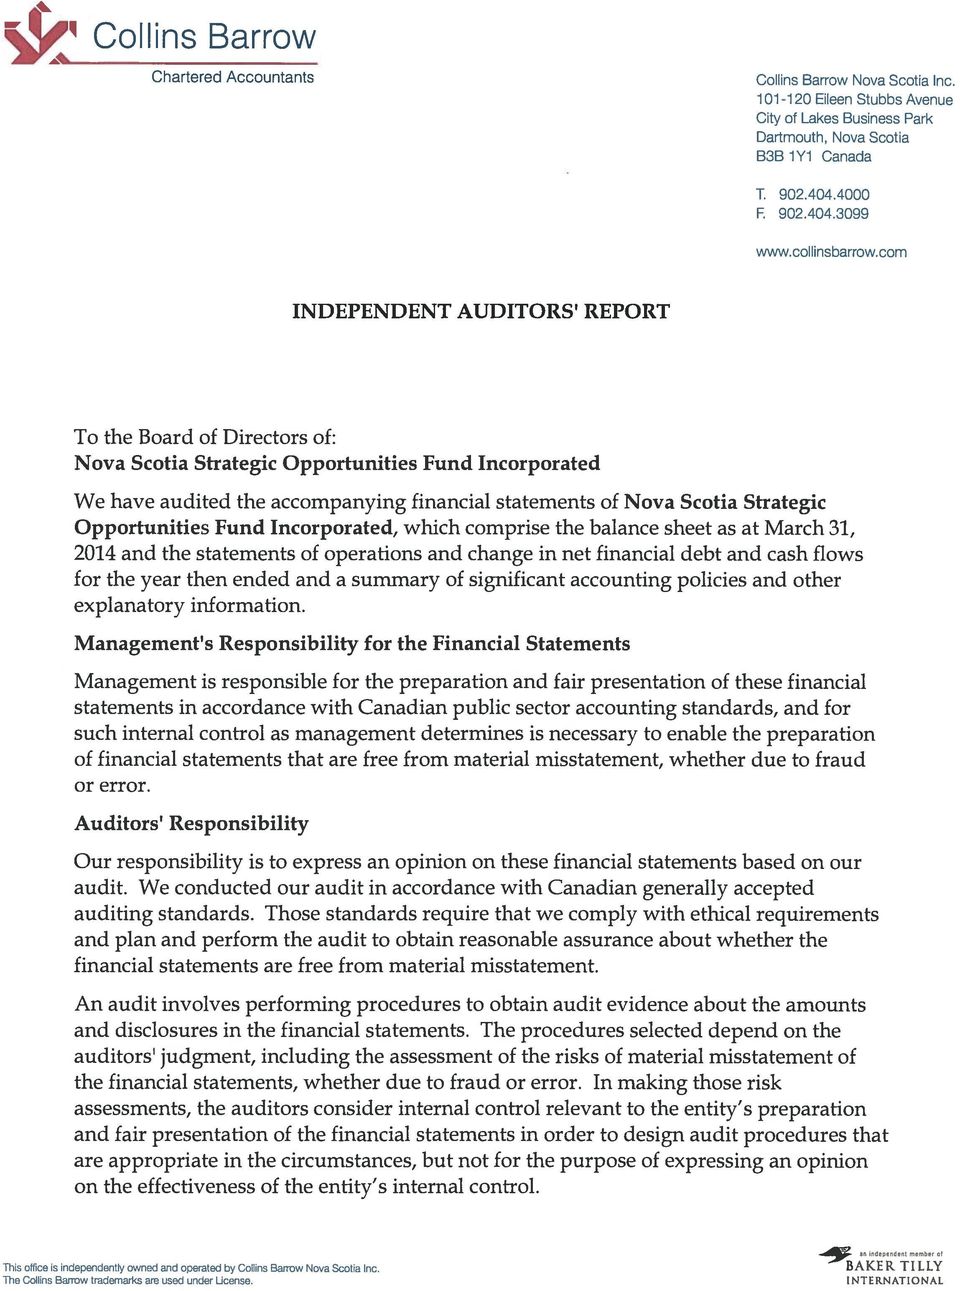 Opportunities Fund Incorporated, which comprise the balance sheet as at March 31, 2014 and the statements of operations and change in net financial debt and cash flows for the year then ended and a